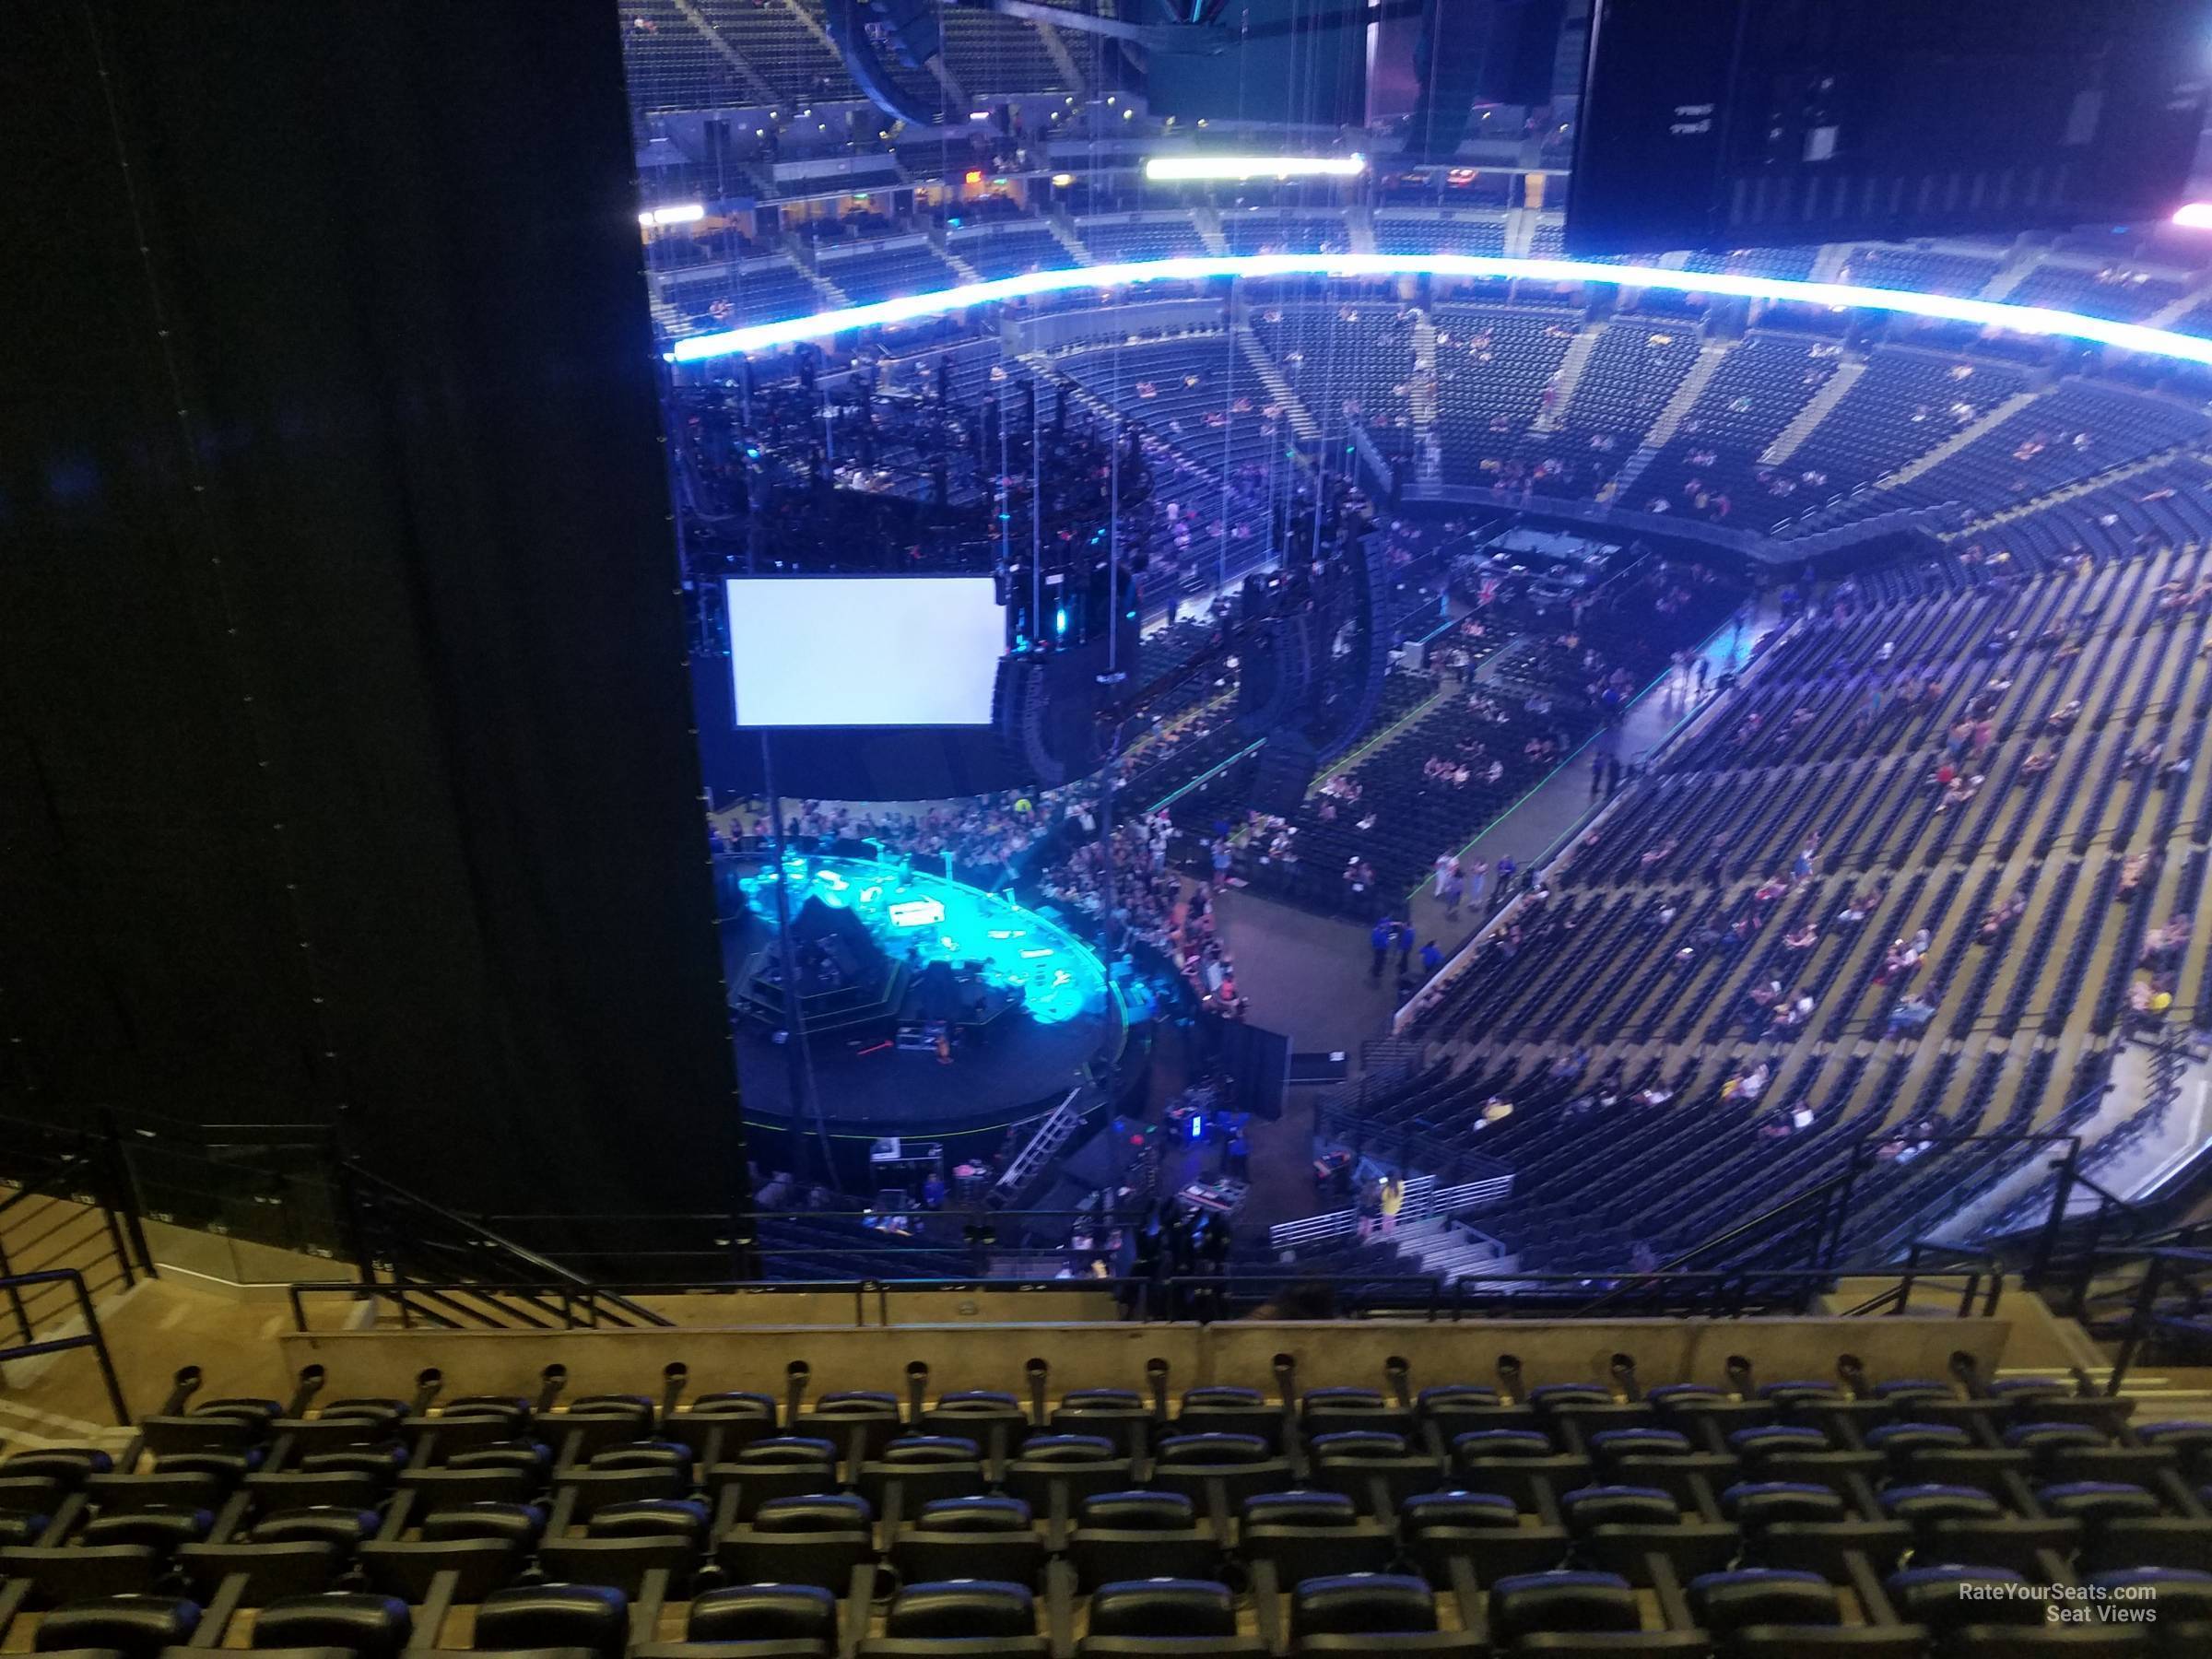 section 356, row 13 seat view  for concert - ball arena